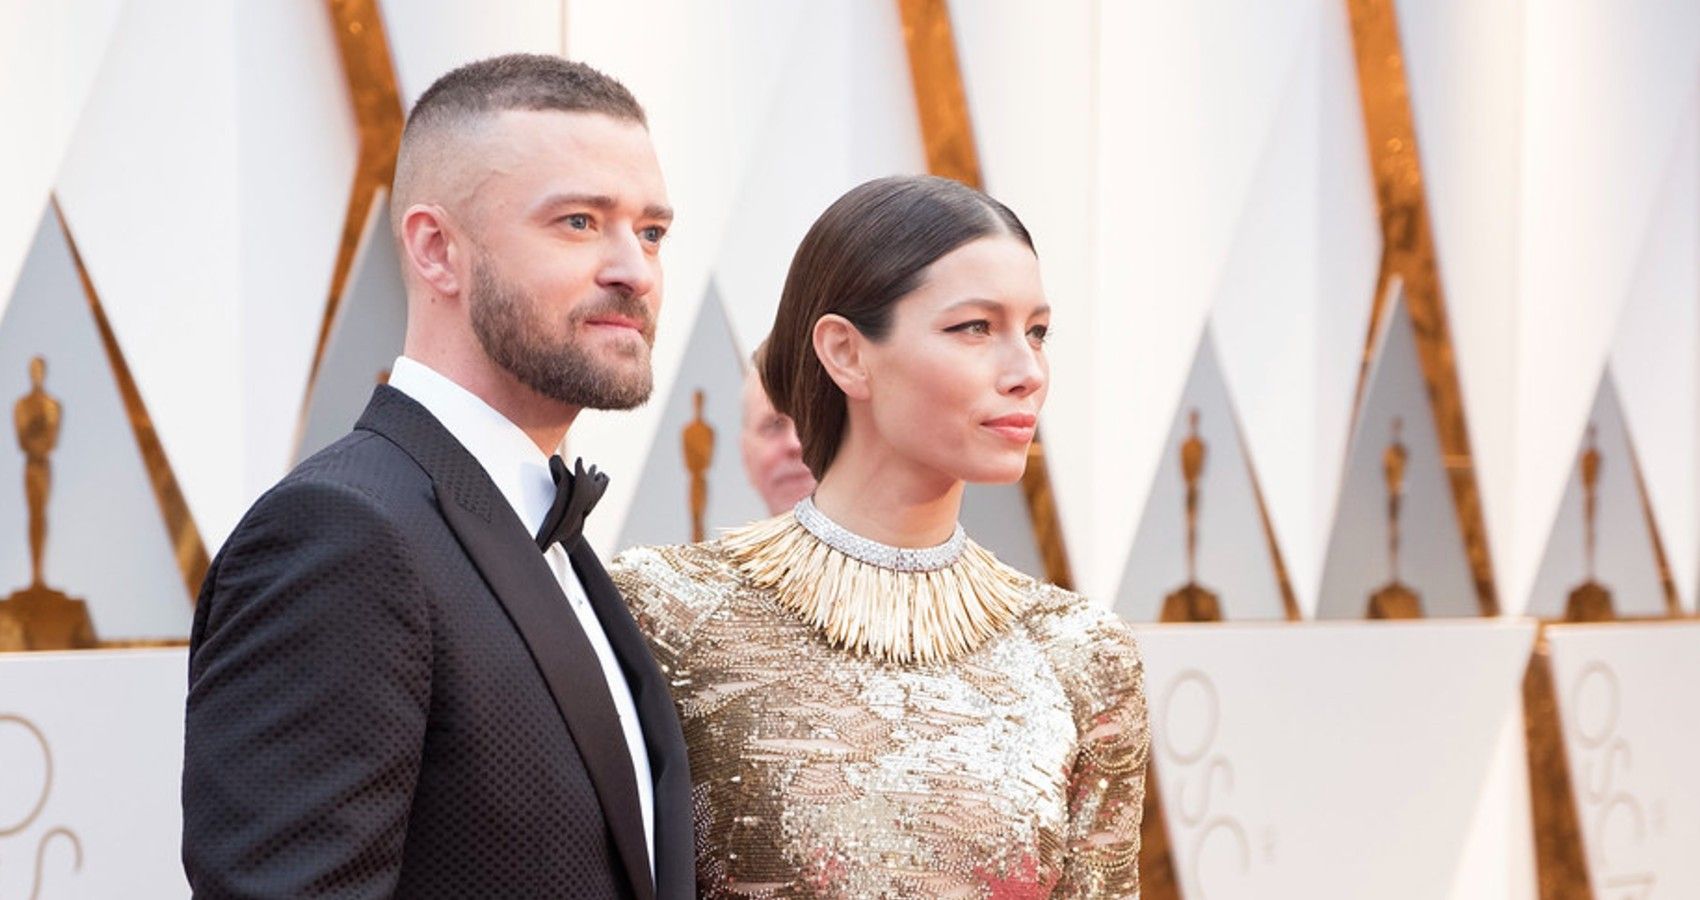 justin Timberlake and Jessica Biel on the red carpet